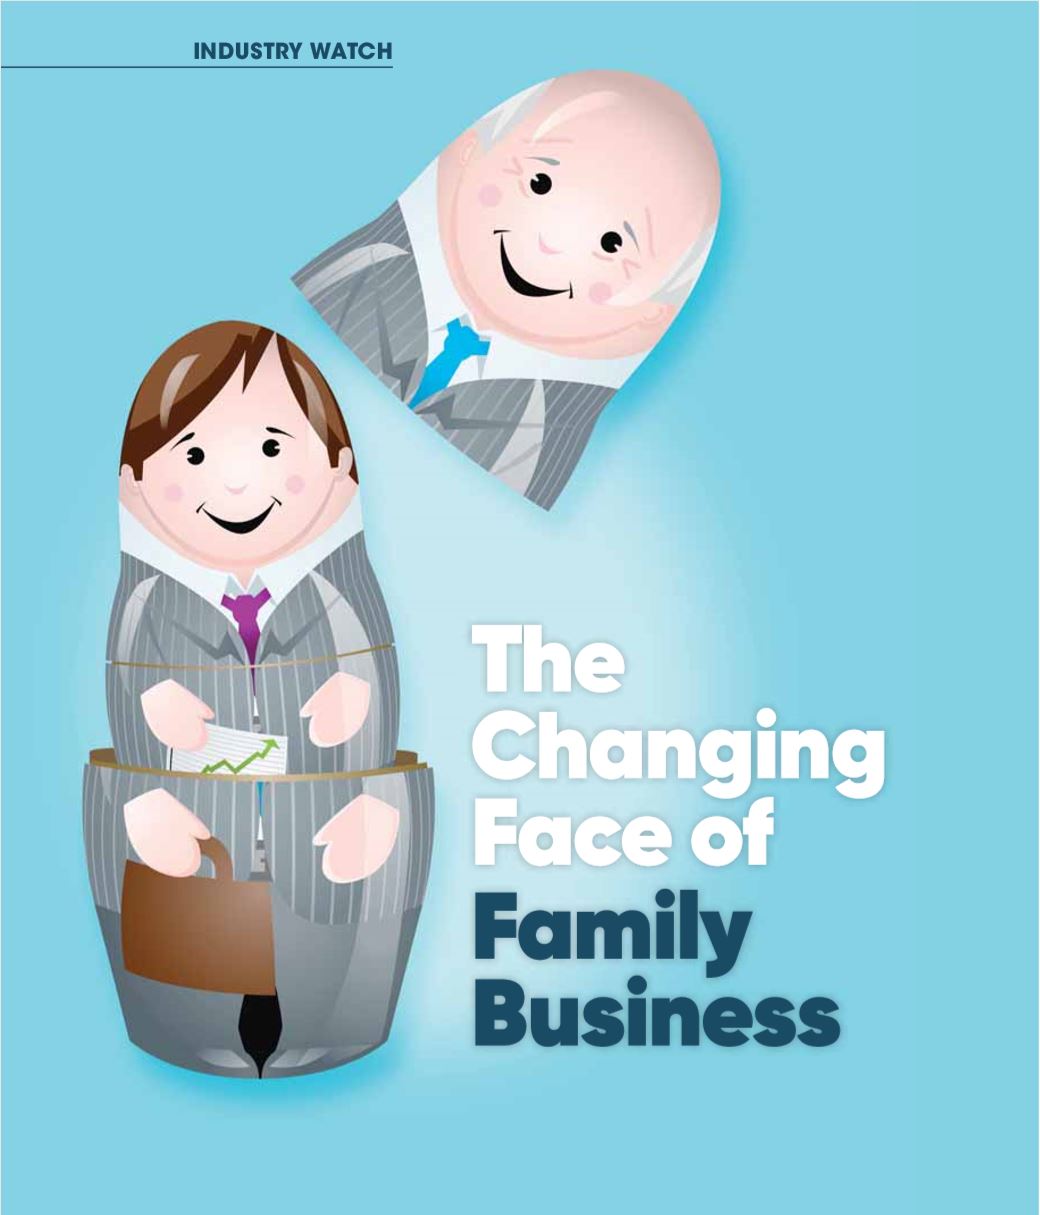 Transformation: The new normal for next-gen family businesses